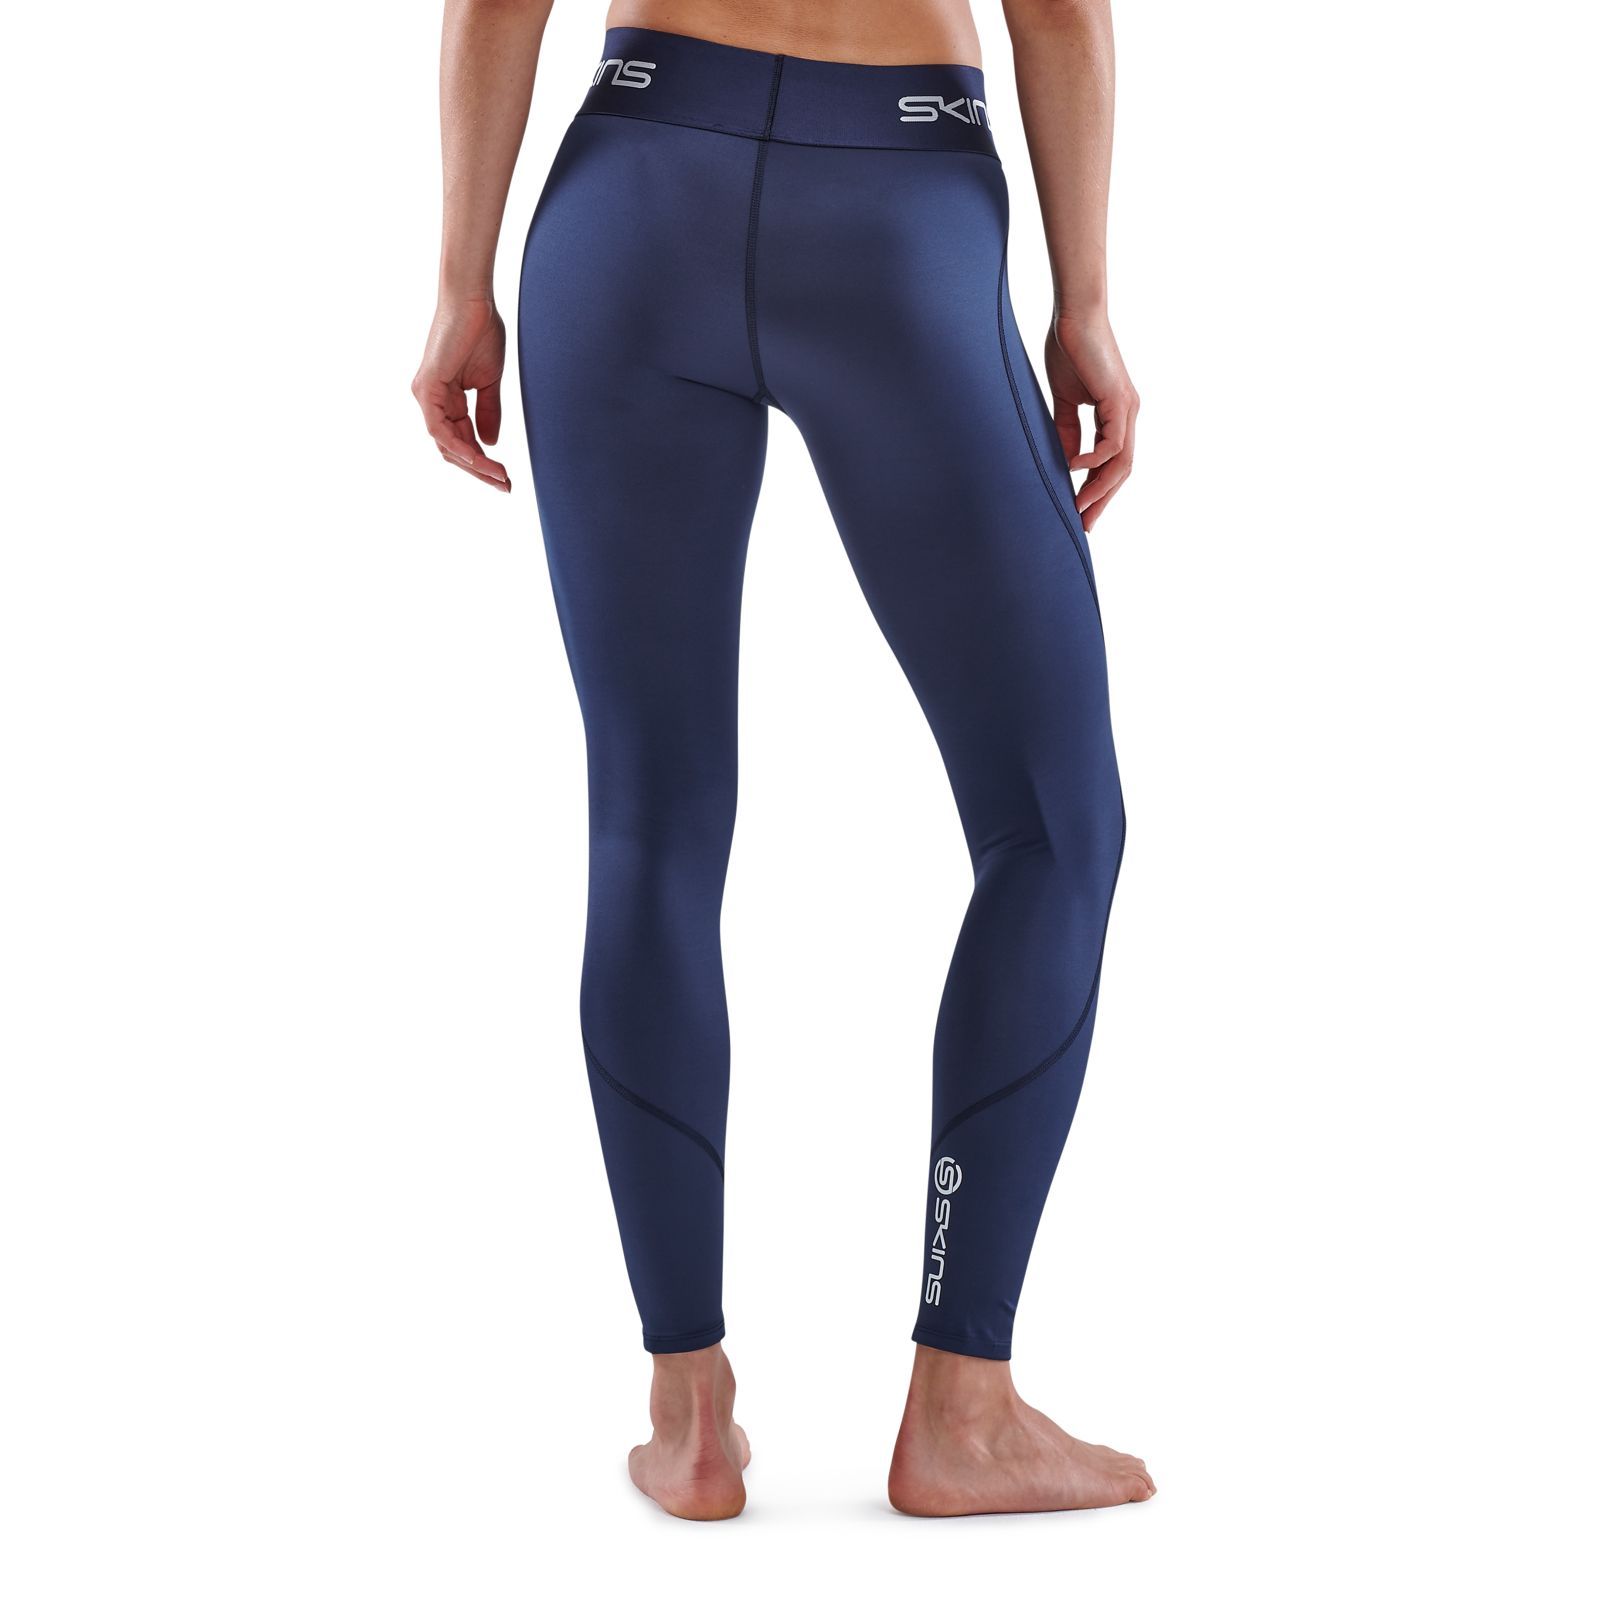 Skins Women's Series 1 7/8 Compression Tights